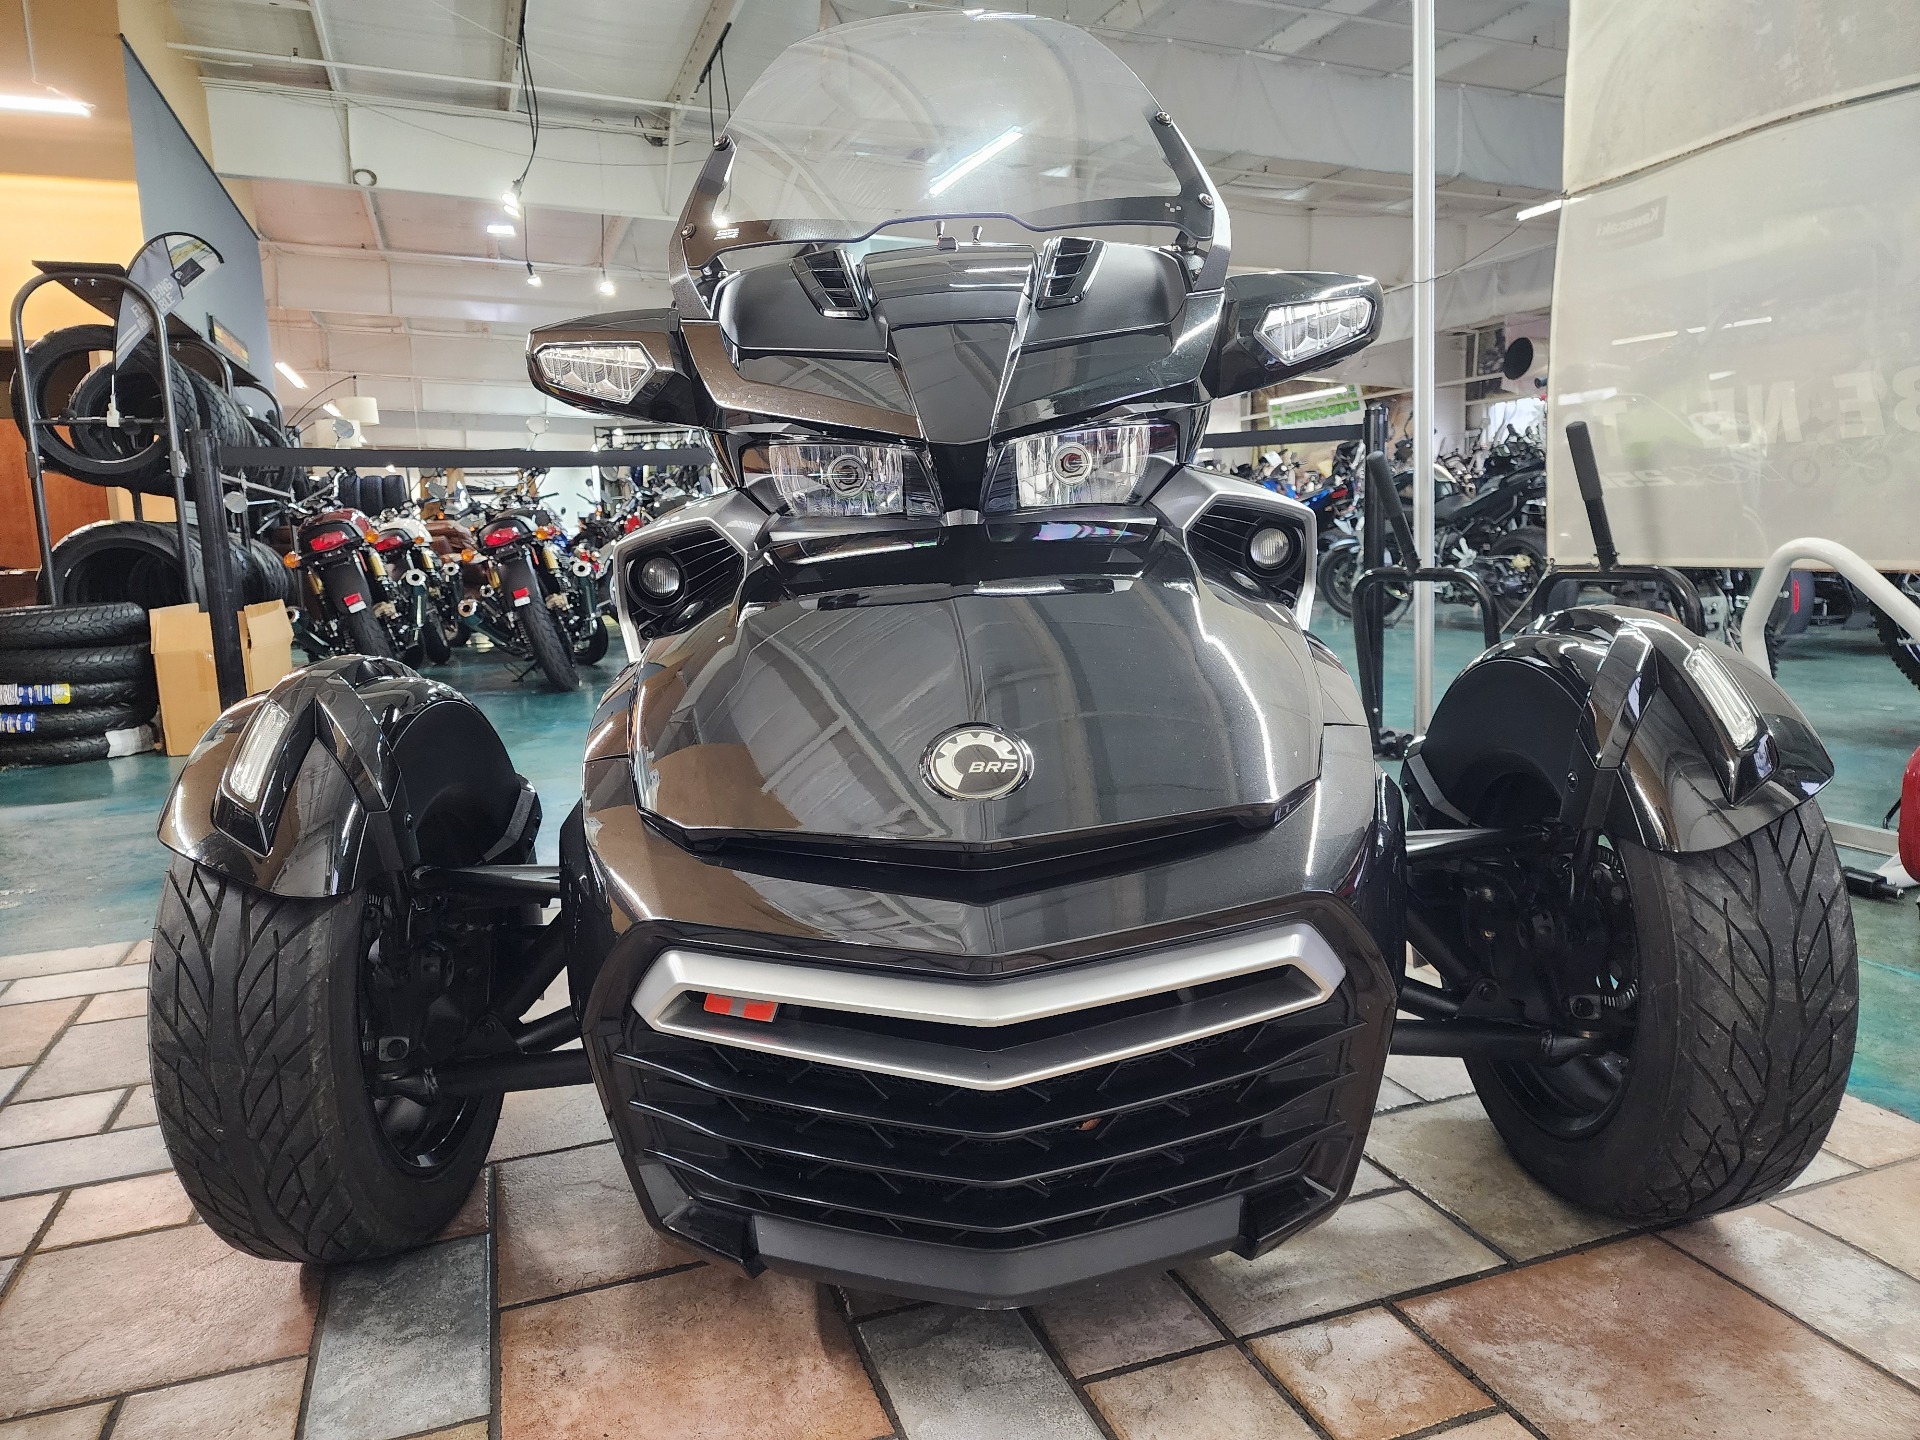 2016 Can-Am Spyder F3-T SE6 w/ Audio System in Louisville, Tennessee - Photo 3